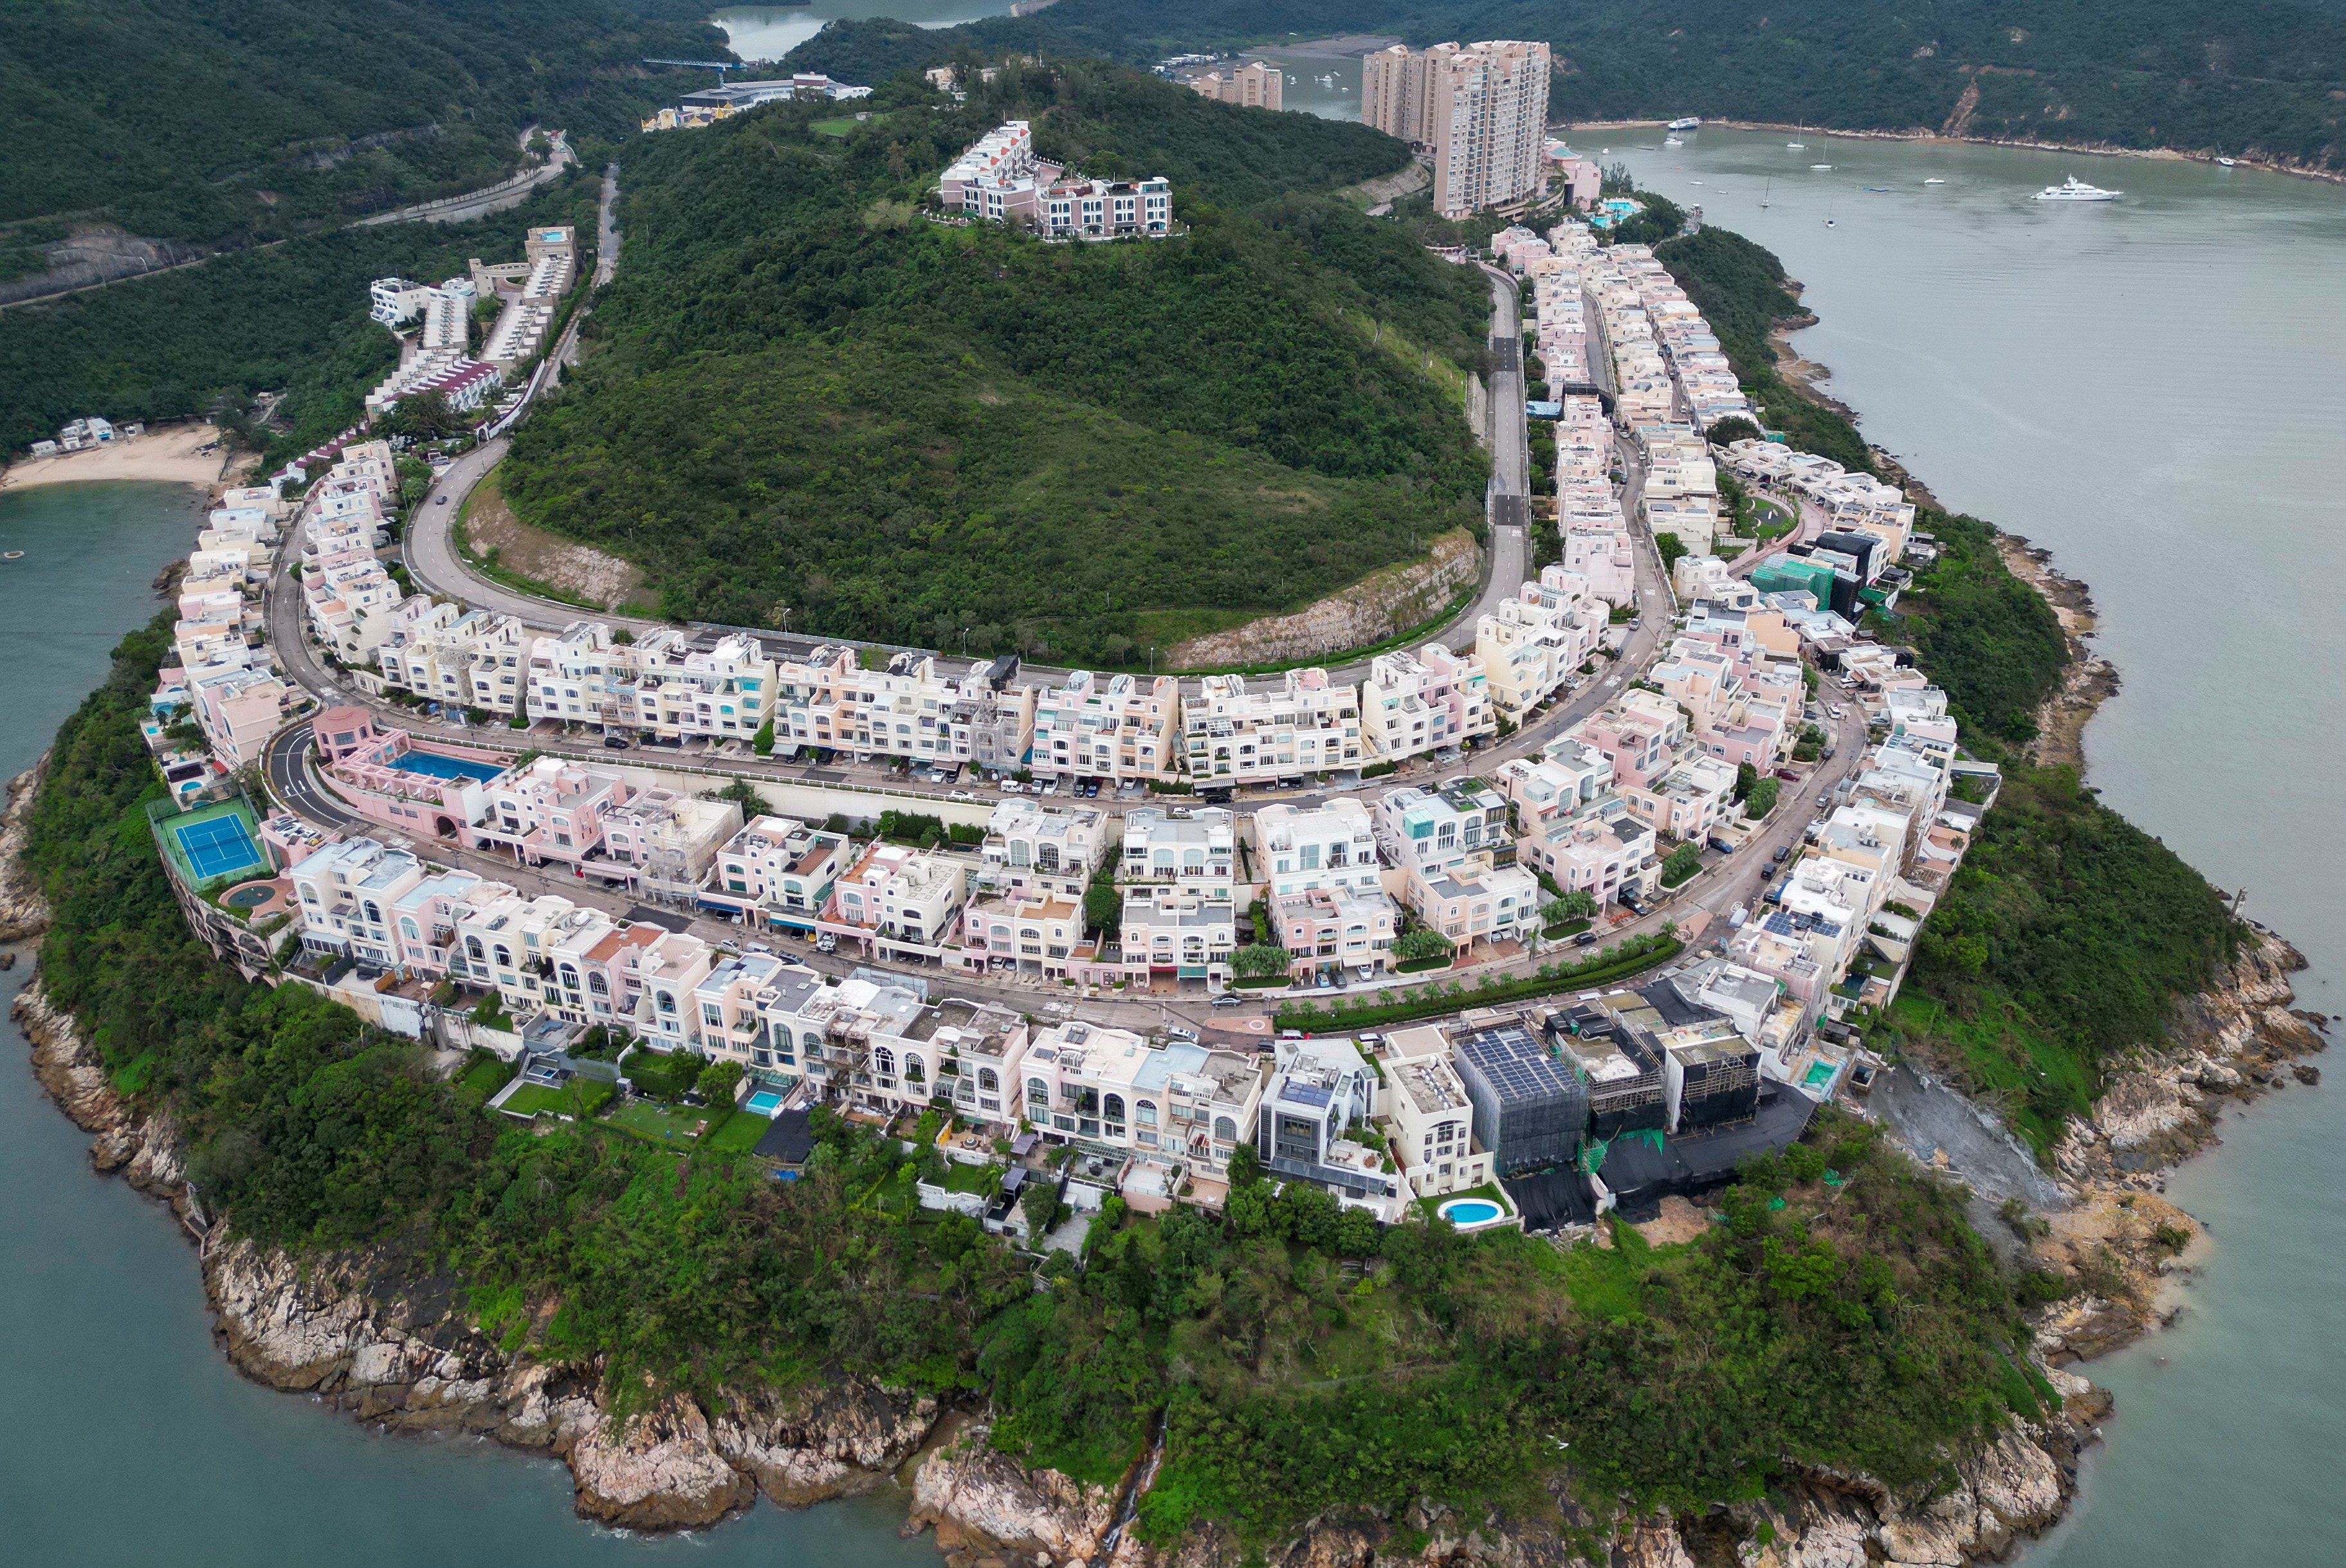 The downpour exposed unauthorised structures at the Redhill Peninsula in Tai Tam. Photo: Dickson Lee